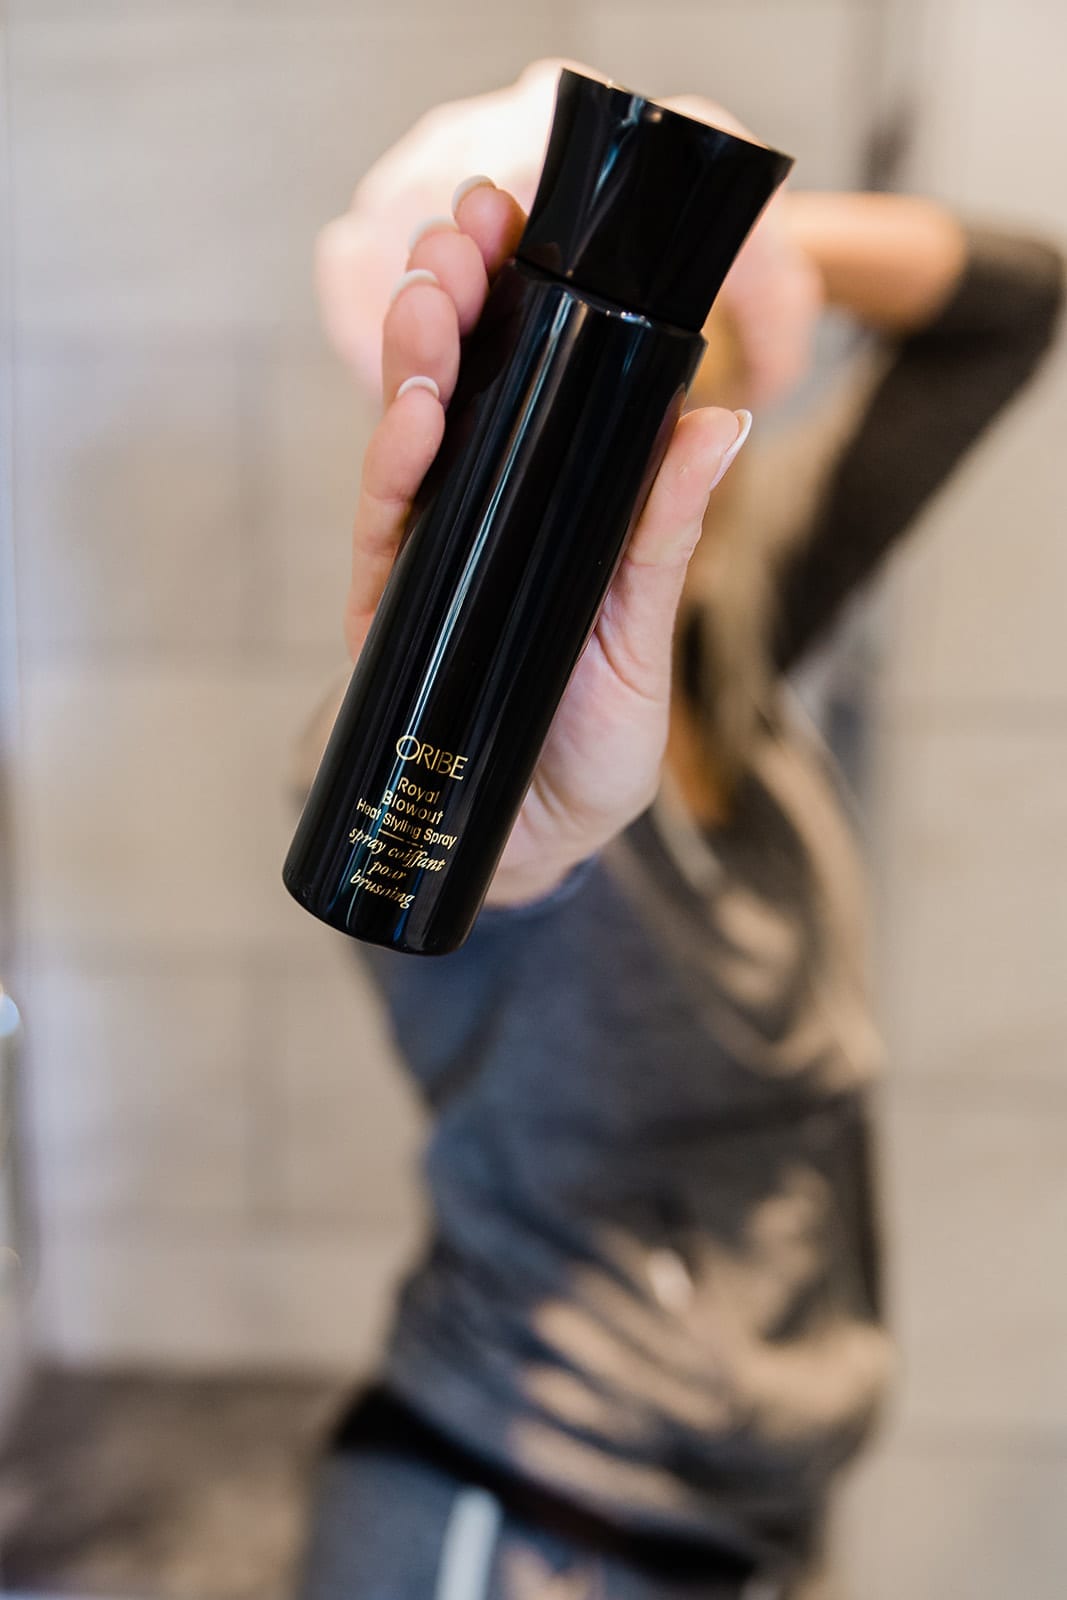 Lifestyle blogger, Kelly Page, for BlueGrayGal tries out the Oribe Bright Blonde shampoo, which is the Oribe purple shampoo, and provides Oribe reviews on other products like the Oribe Signature conditioner, and Oribe Royal Blowout.